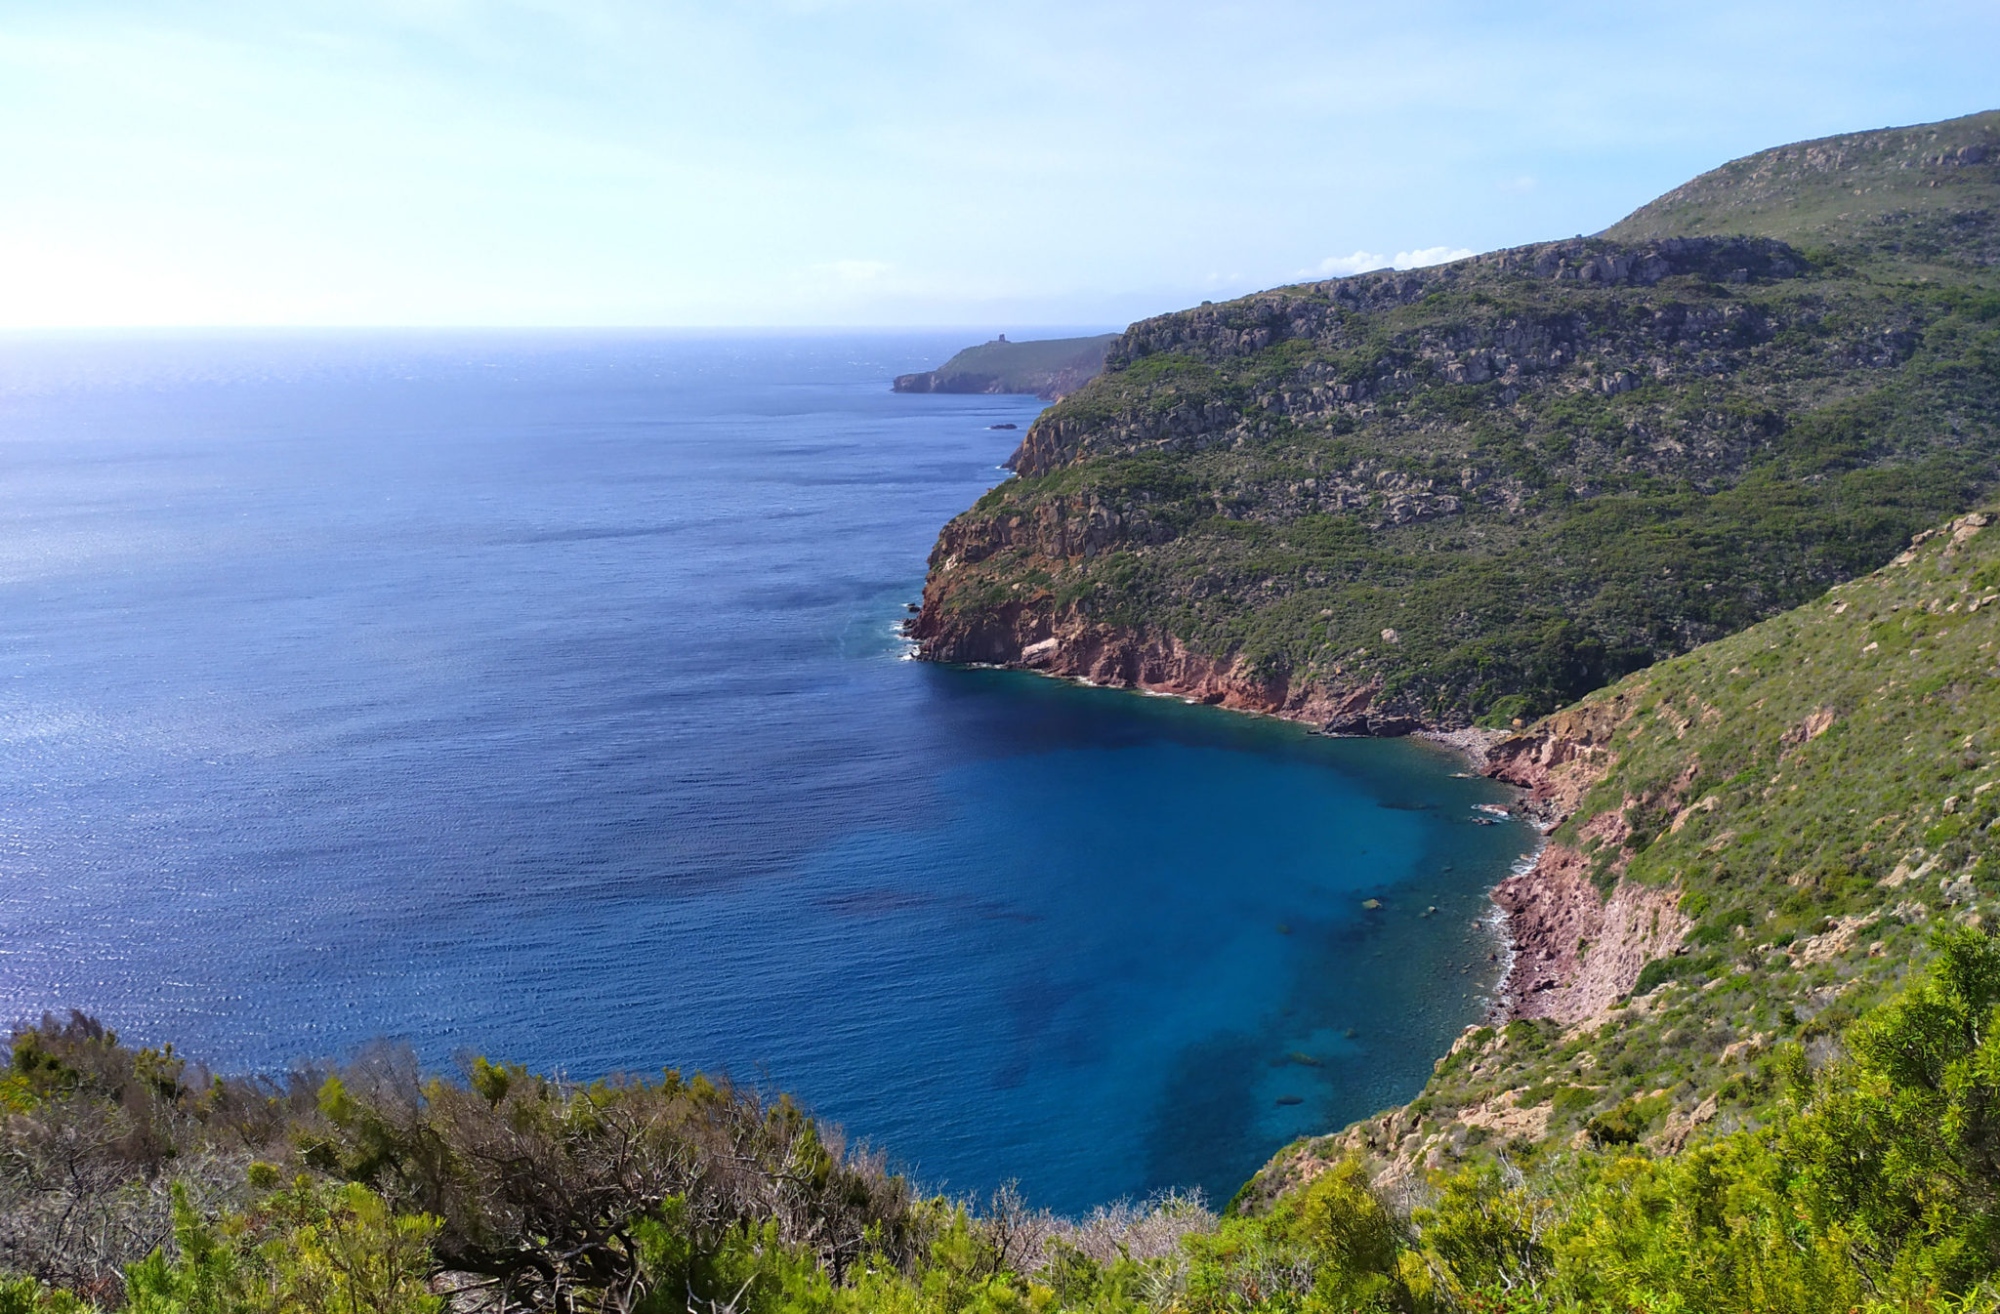 Itinerary from the Country to the Cala del Ceppo